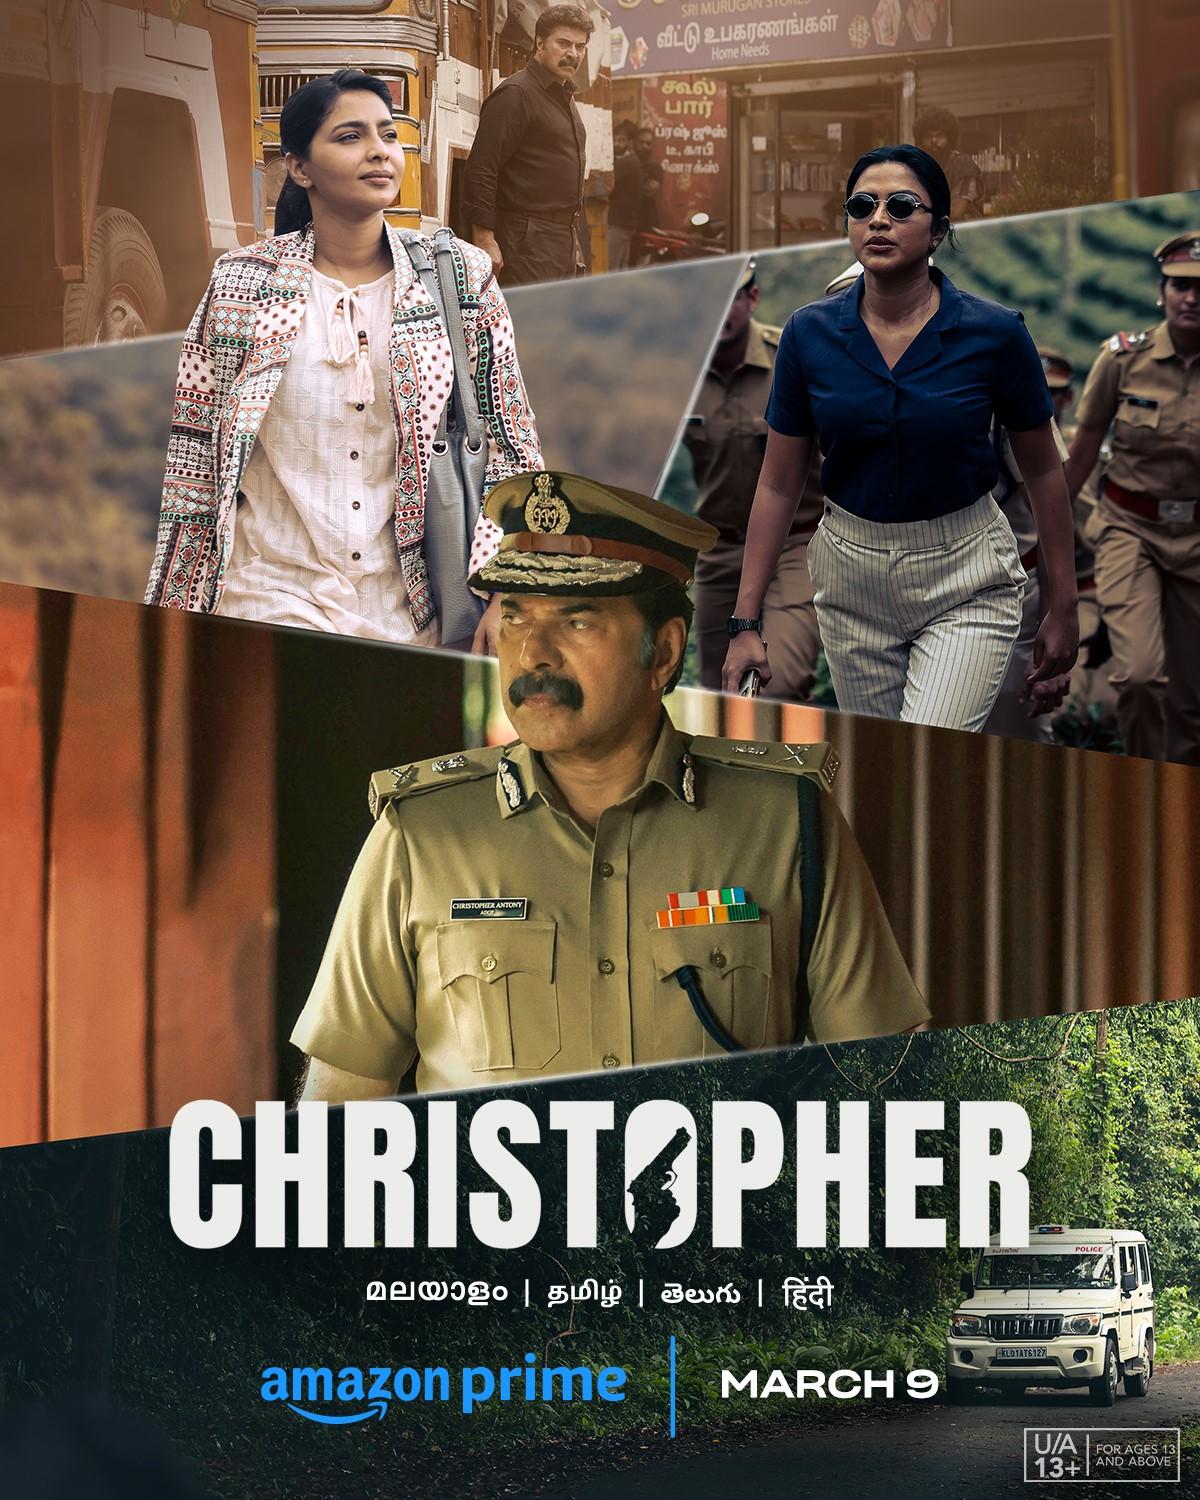 christopher malayalam movie review in tamil